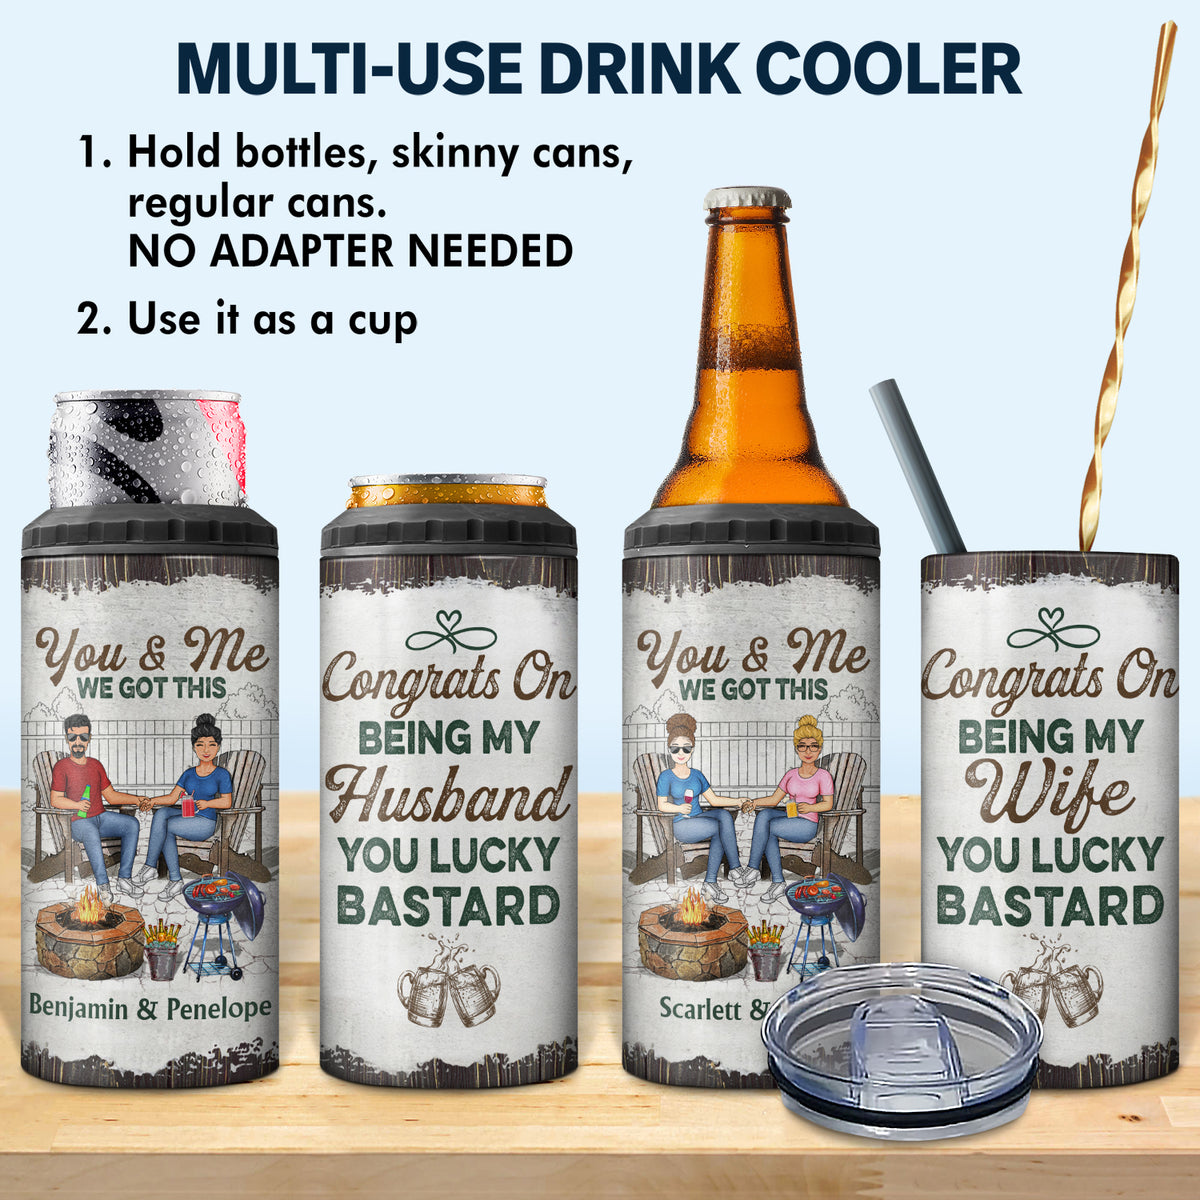  Reduce Can Cooler - 4-in-1 Stainless Steel Can Holder and Beer  Bottle Holder, 4 Hours Cold - 14 oz Multi-Use Drink Cup that Holds Slim  Cans, Regular Cans, Bottles and Cocktails 